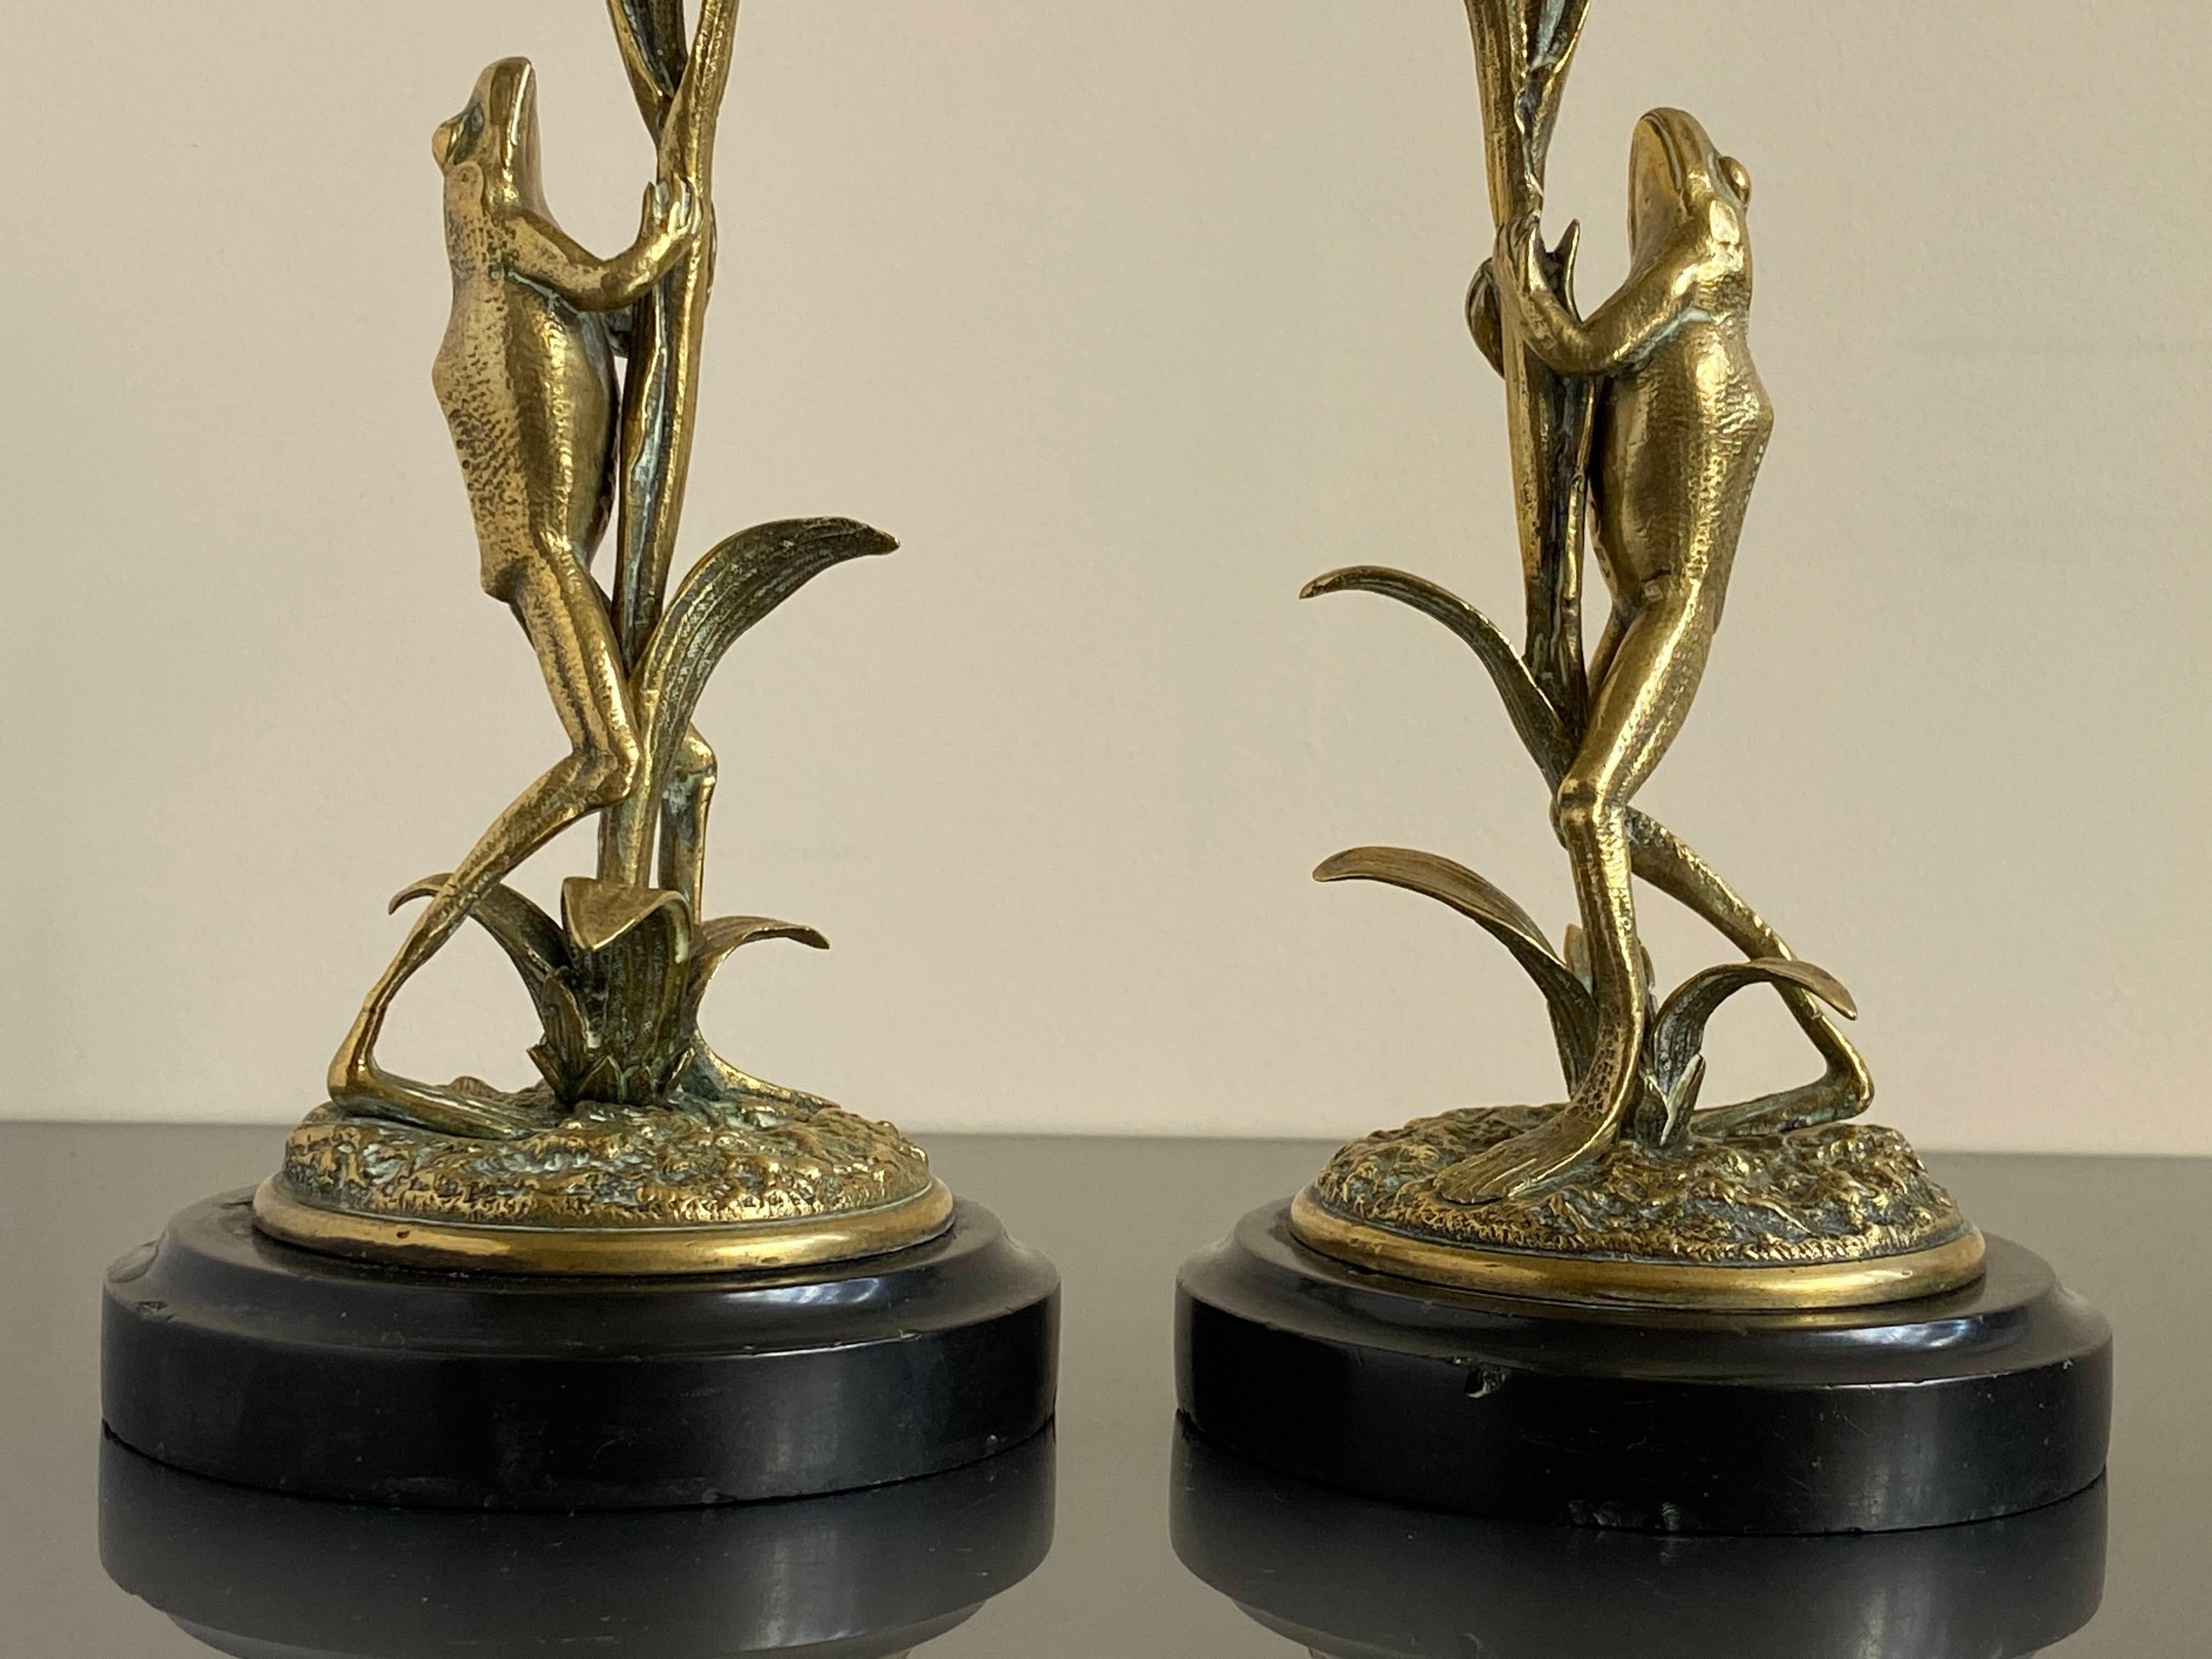 Art Nouveau Pair of Brass Candle Sticks Modelled as Frogs Climbing Lotus Flowers 1